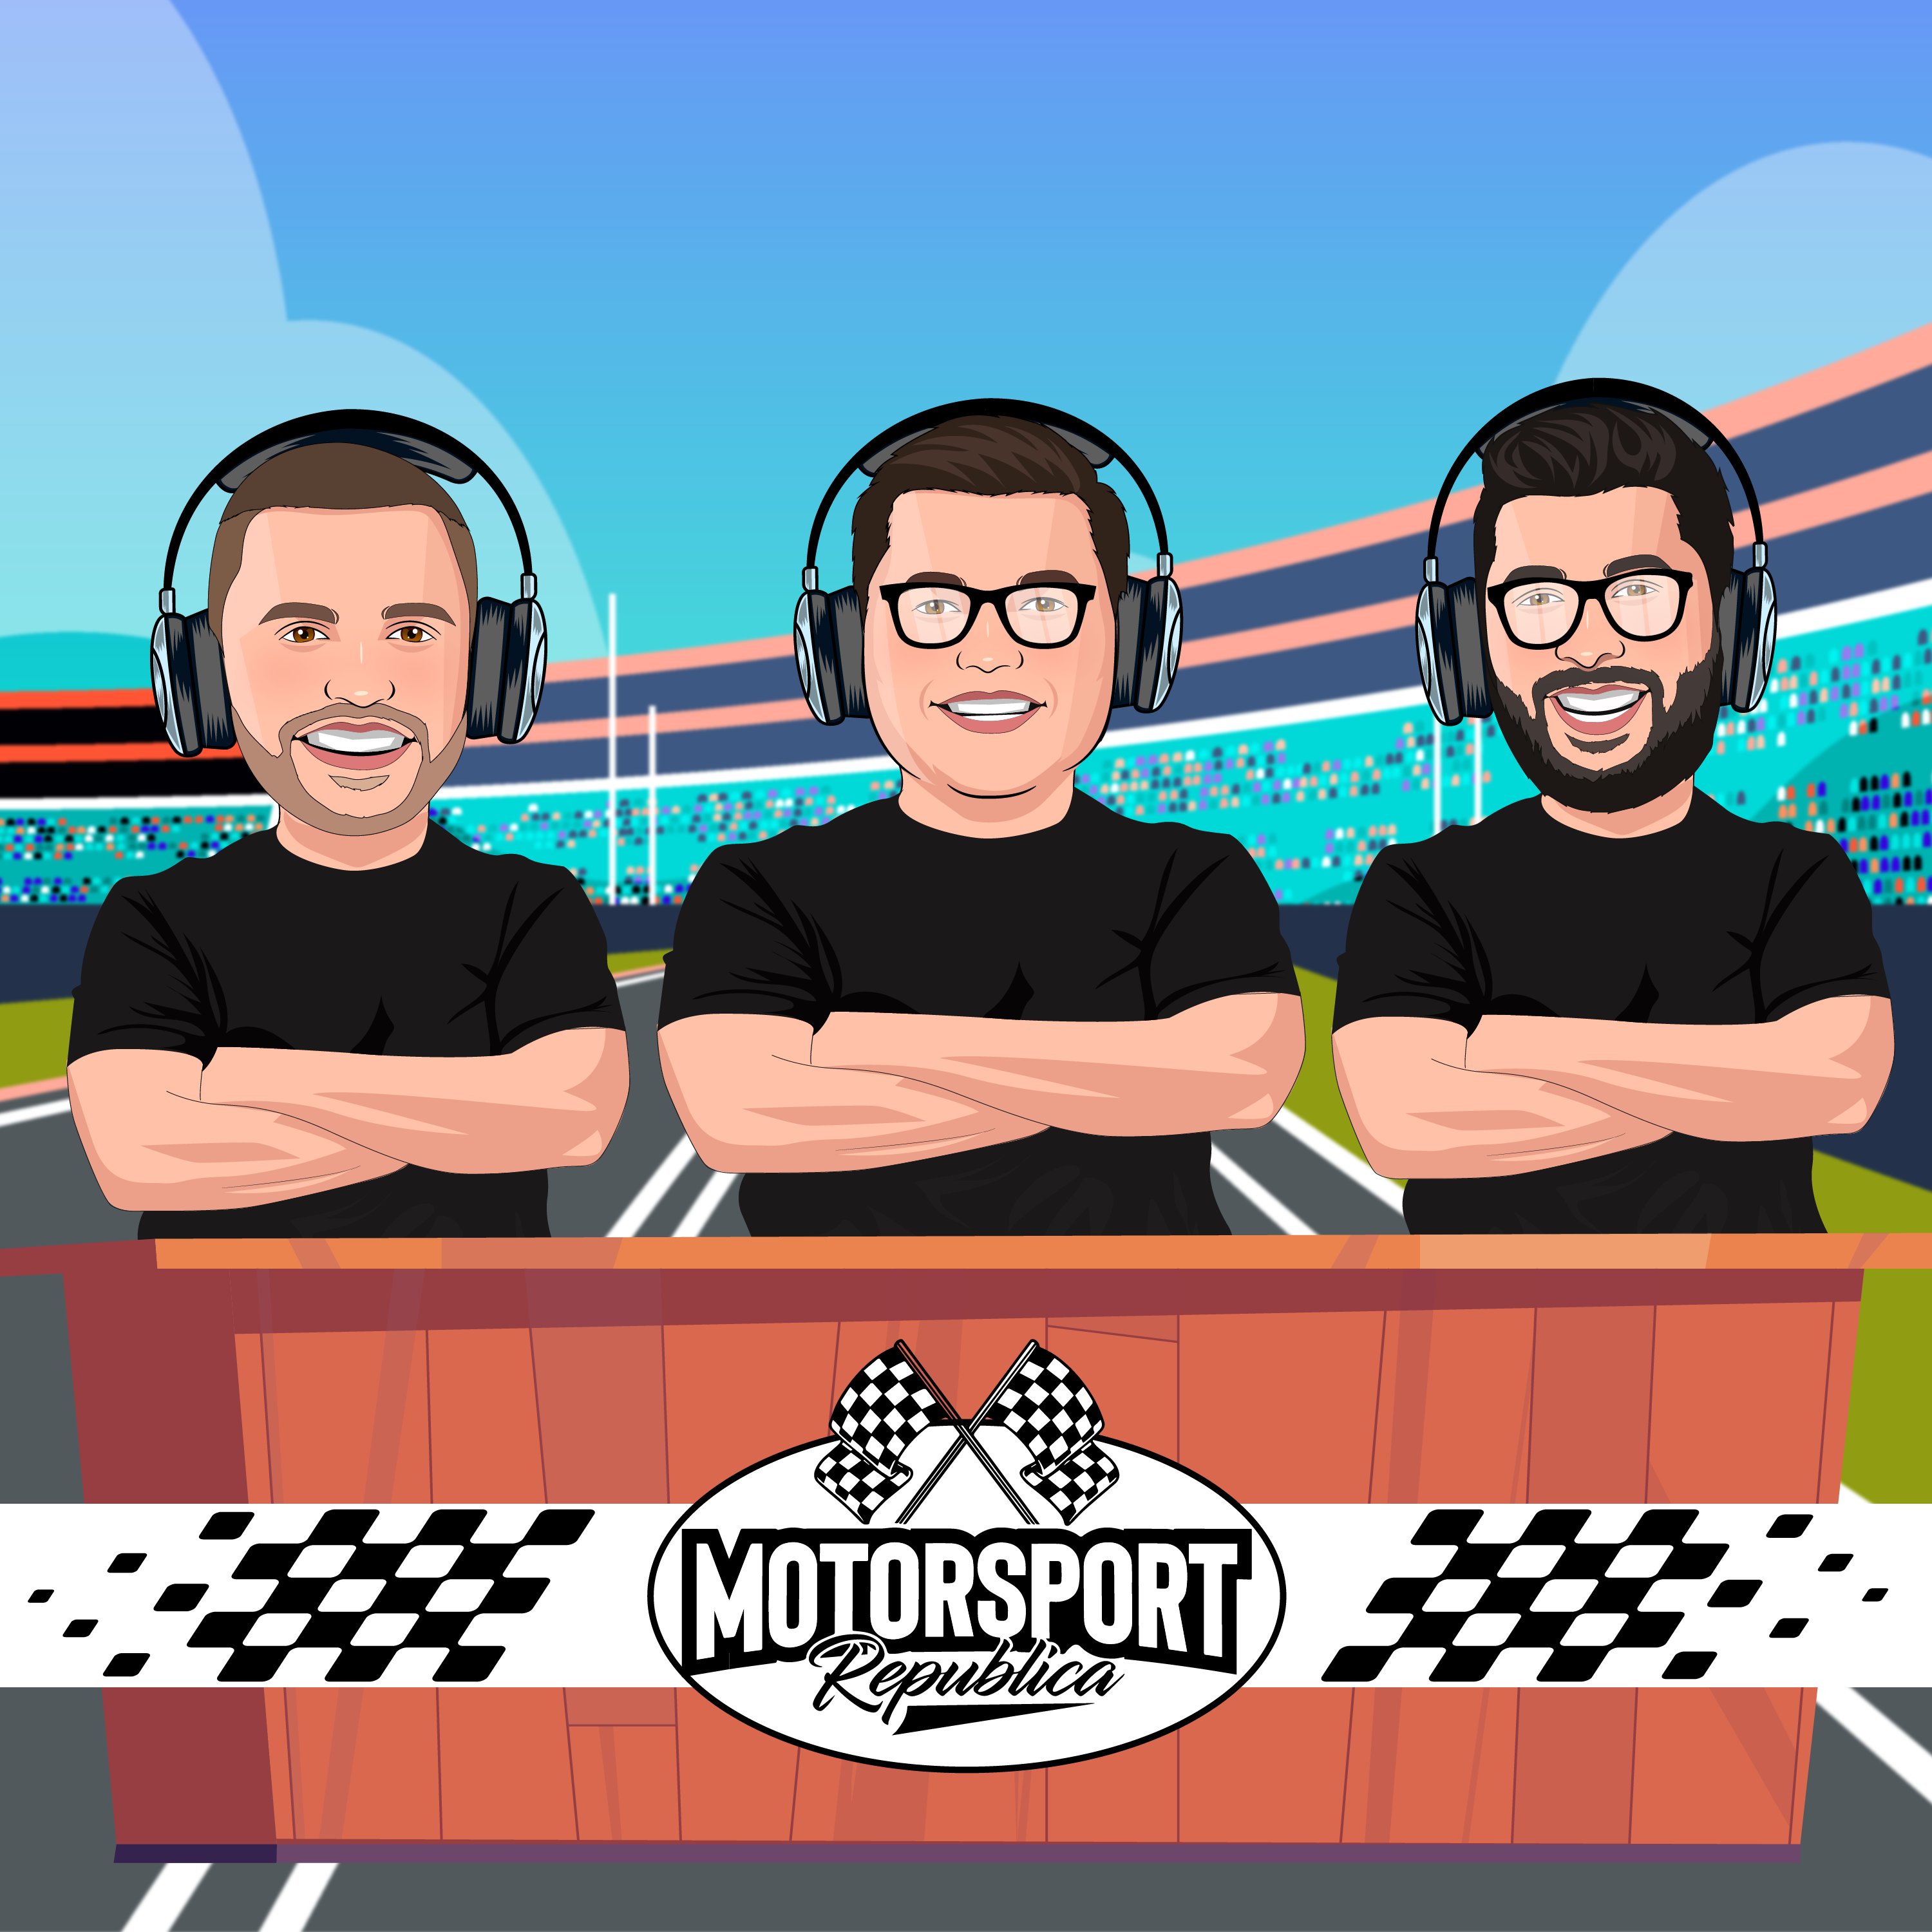 Motorsport Republica Podcast Episode 59: He Is The Show.